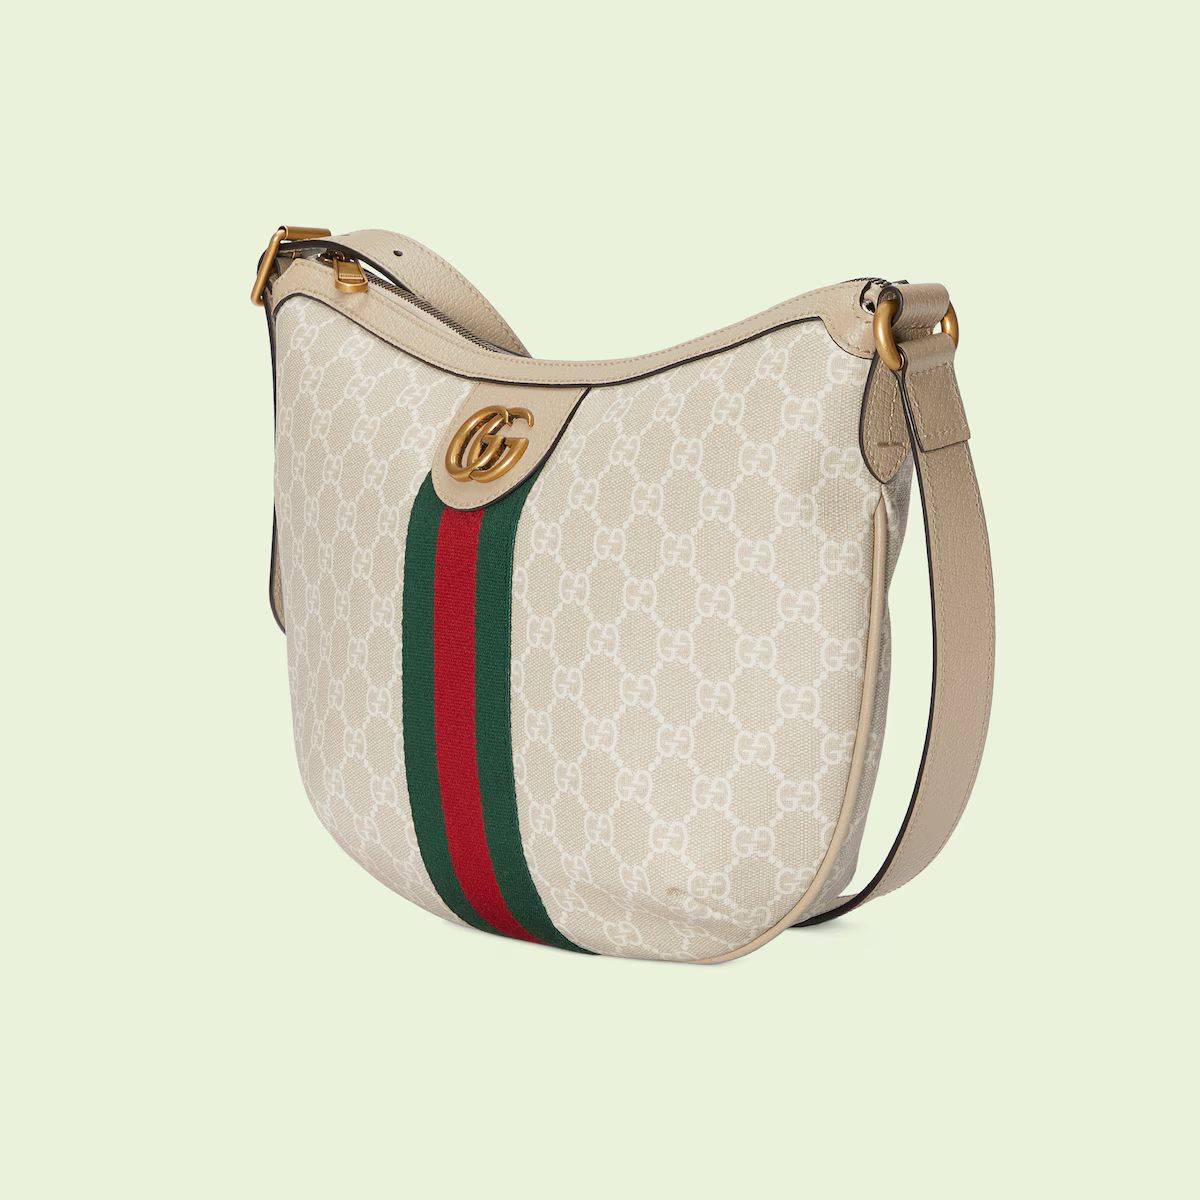 Gucci Ophidia GG small shoulder bag | Gucci (US)